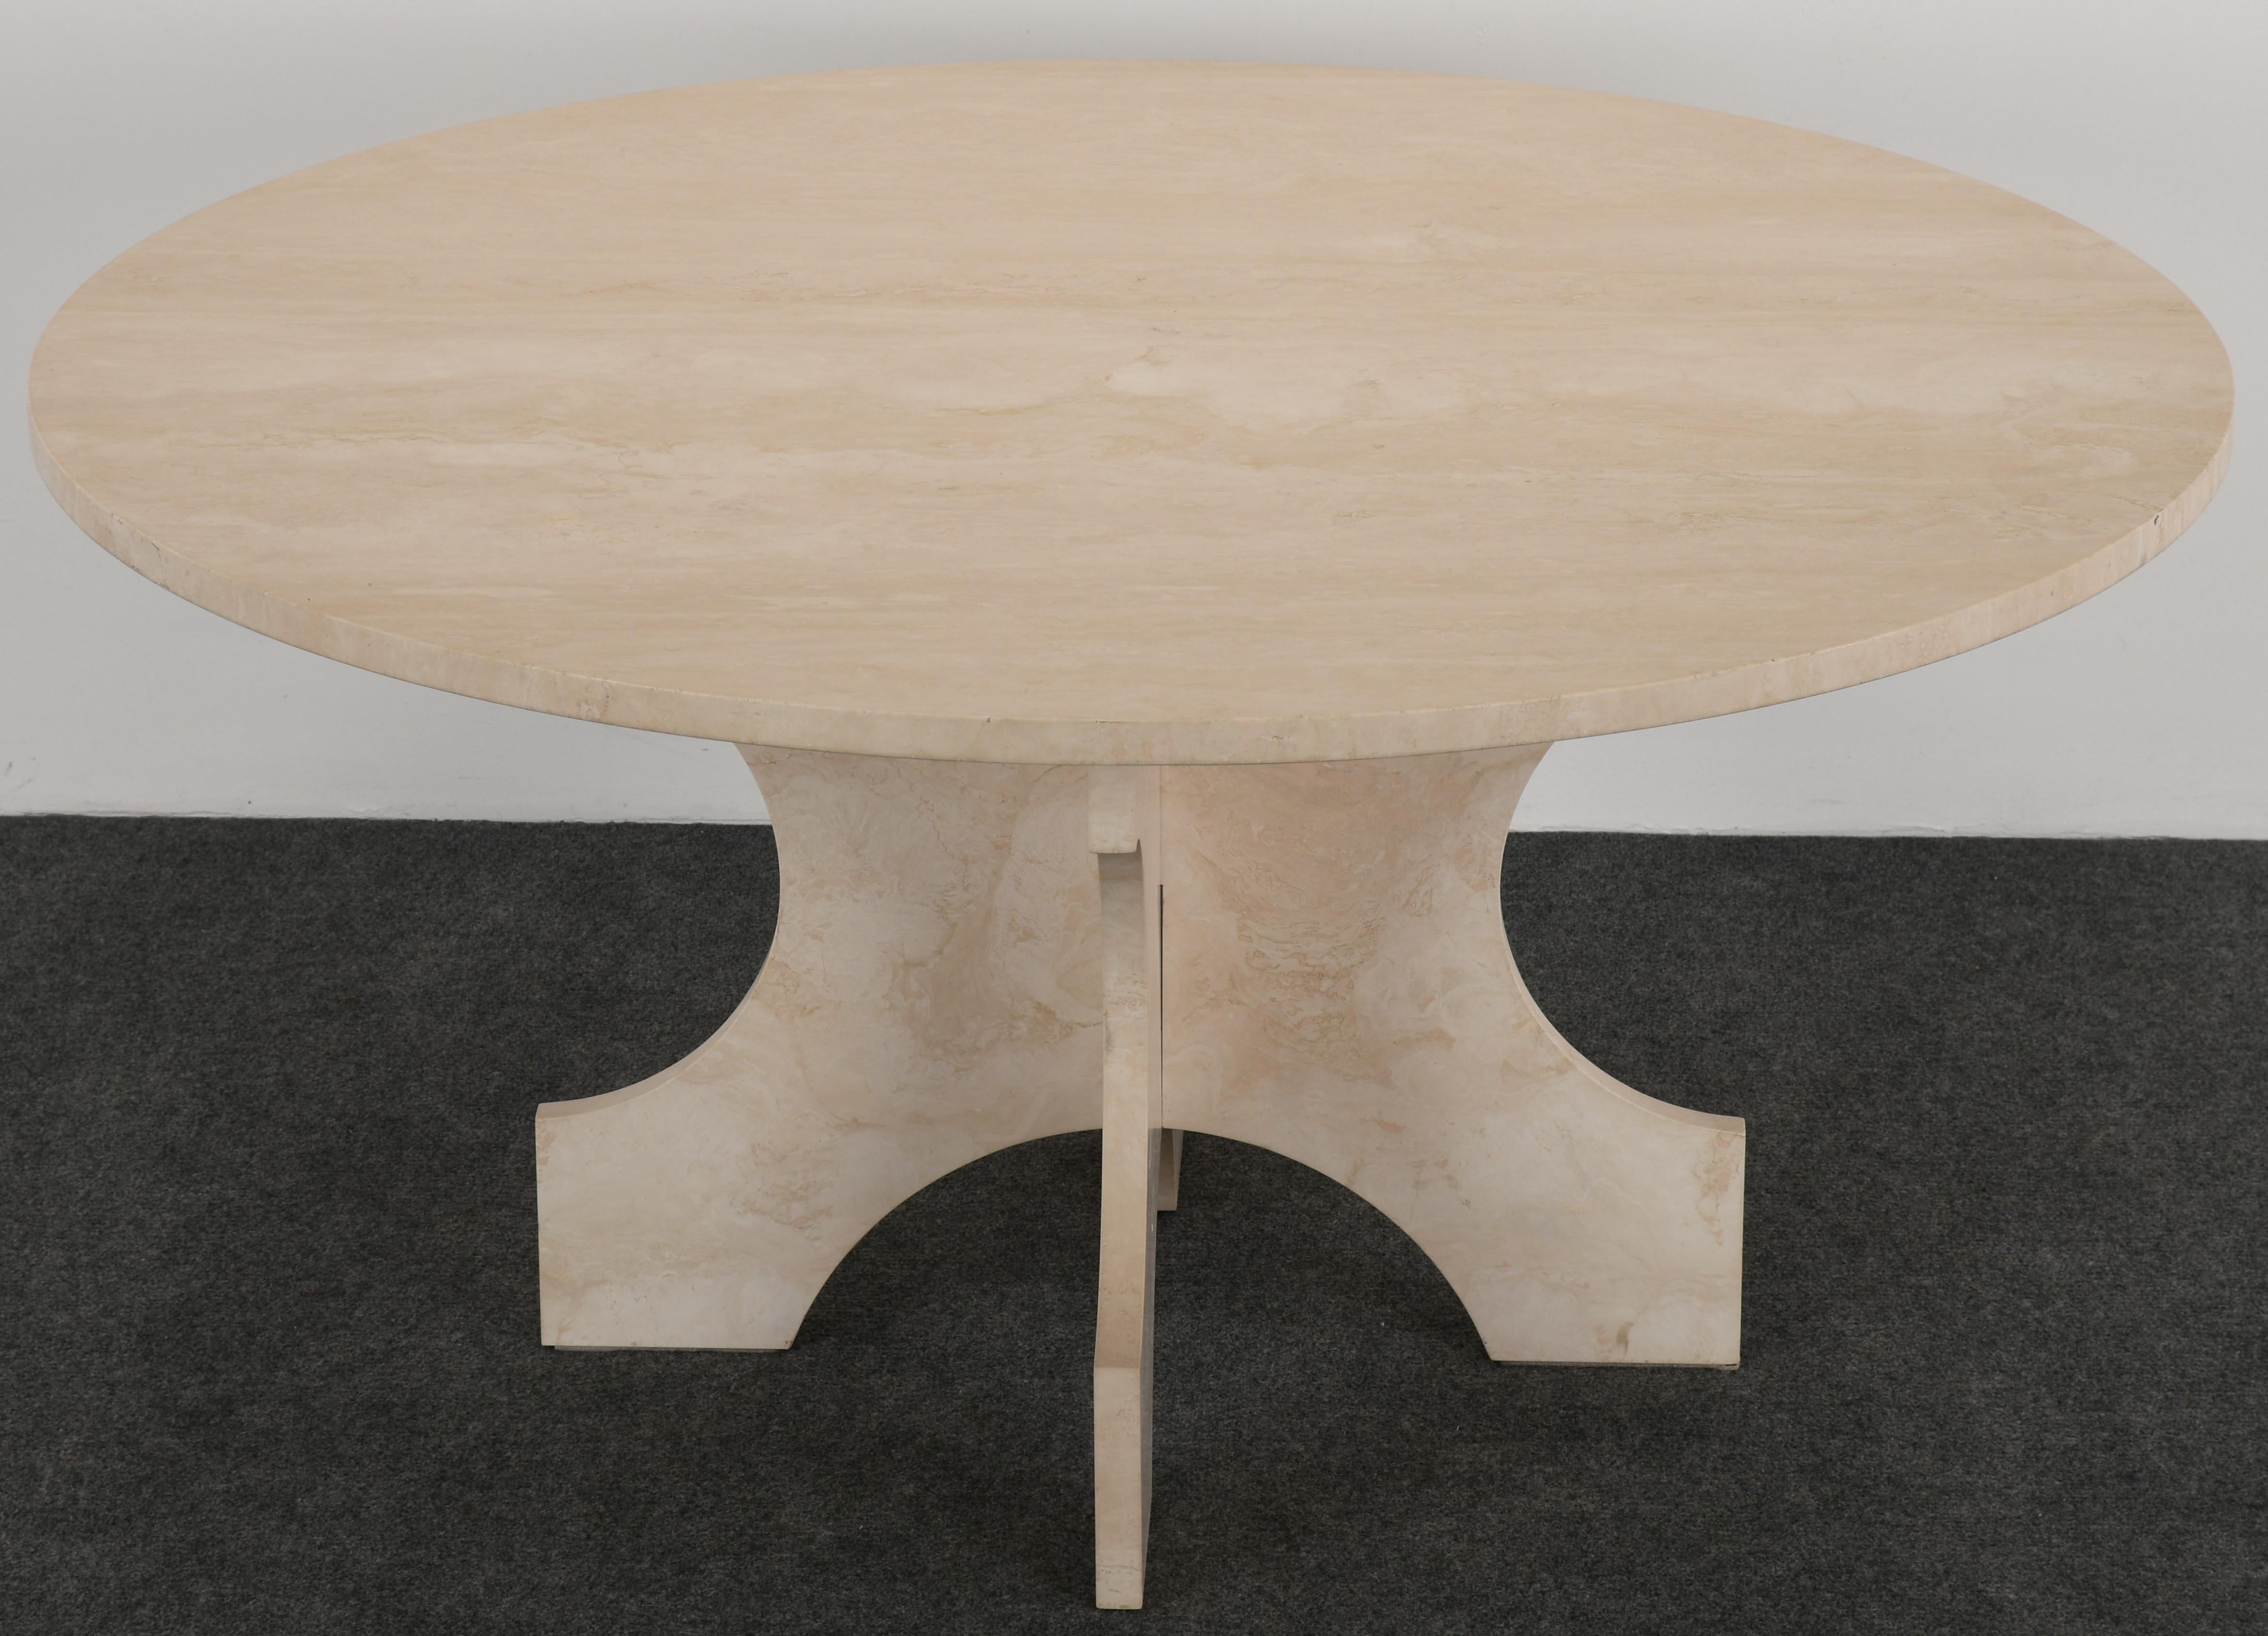 A stunning custom made Travertine Dining Table by Balsamo Antiques, 20th Century. This minimalist table has an x-leg base with a matte or honed finish and one inch thick top. It assembles in three pieces and is in very good condition.